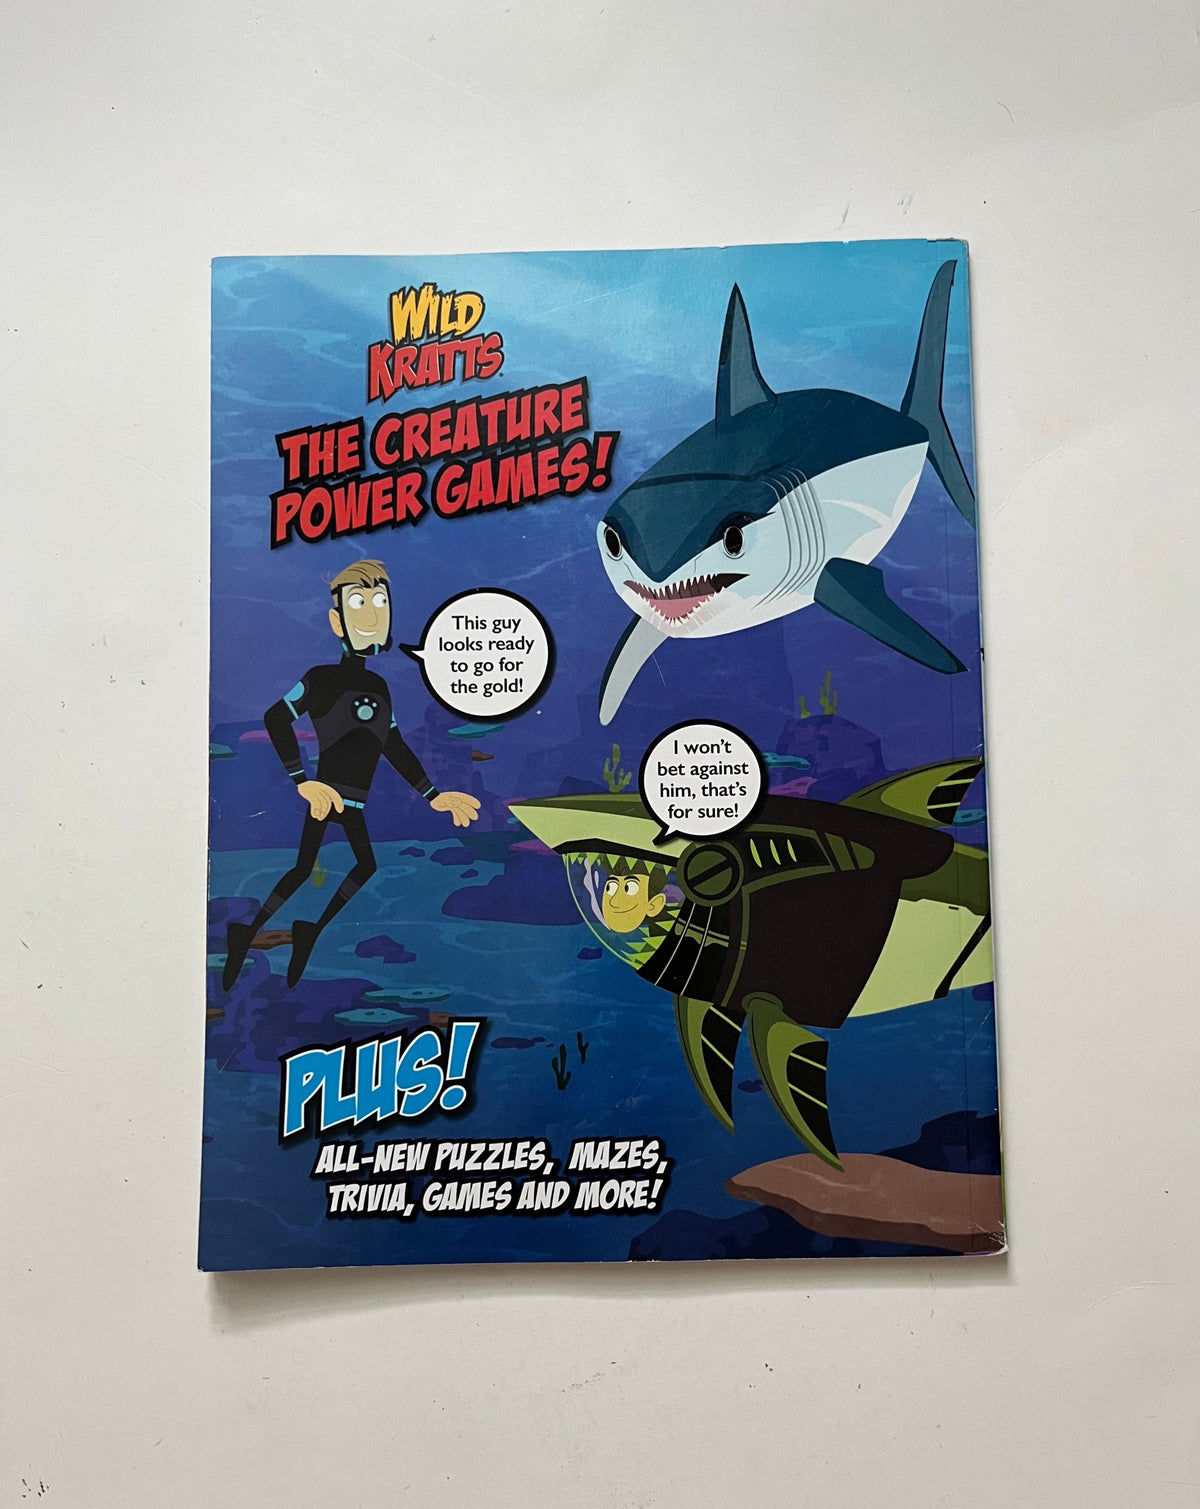 Wild Kratts: The Creature Power Games!!! by the Kratt Brothers